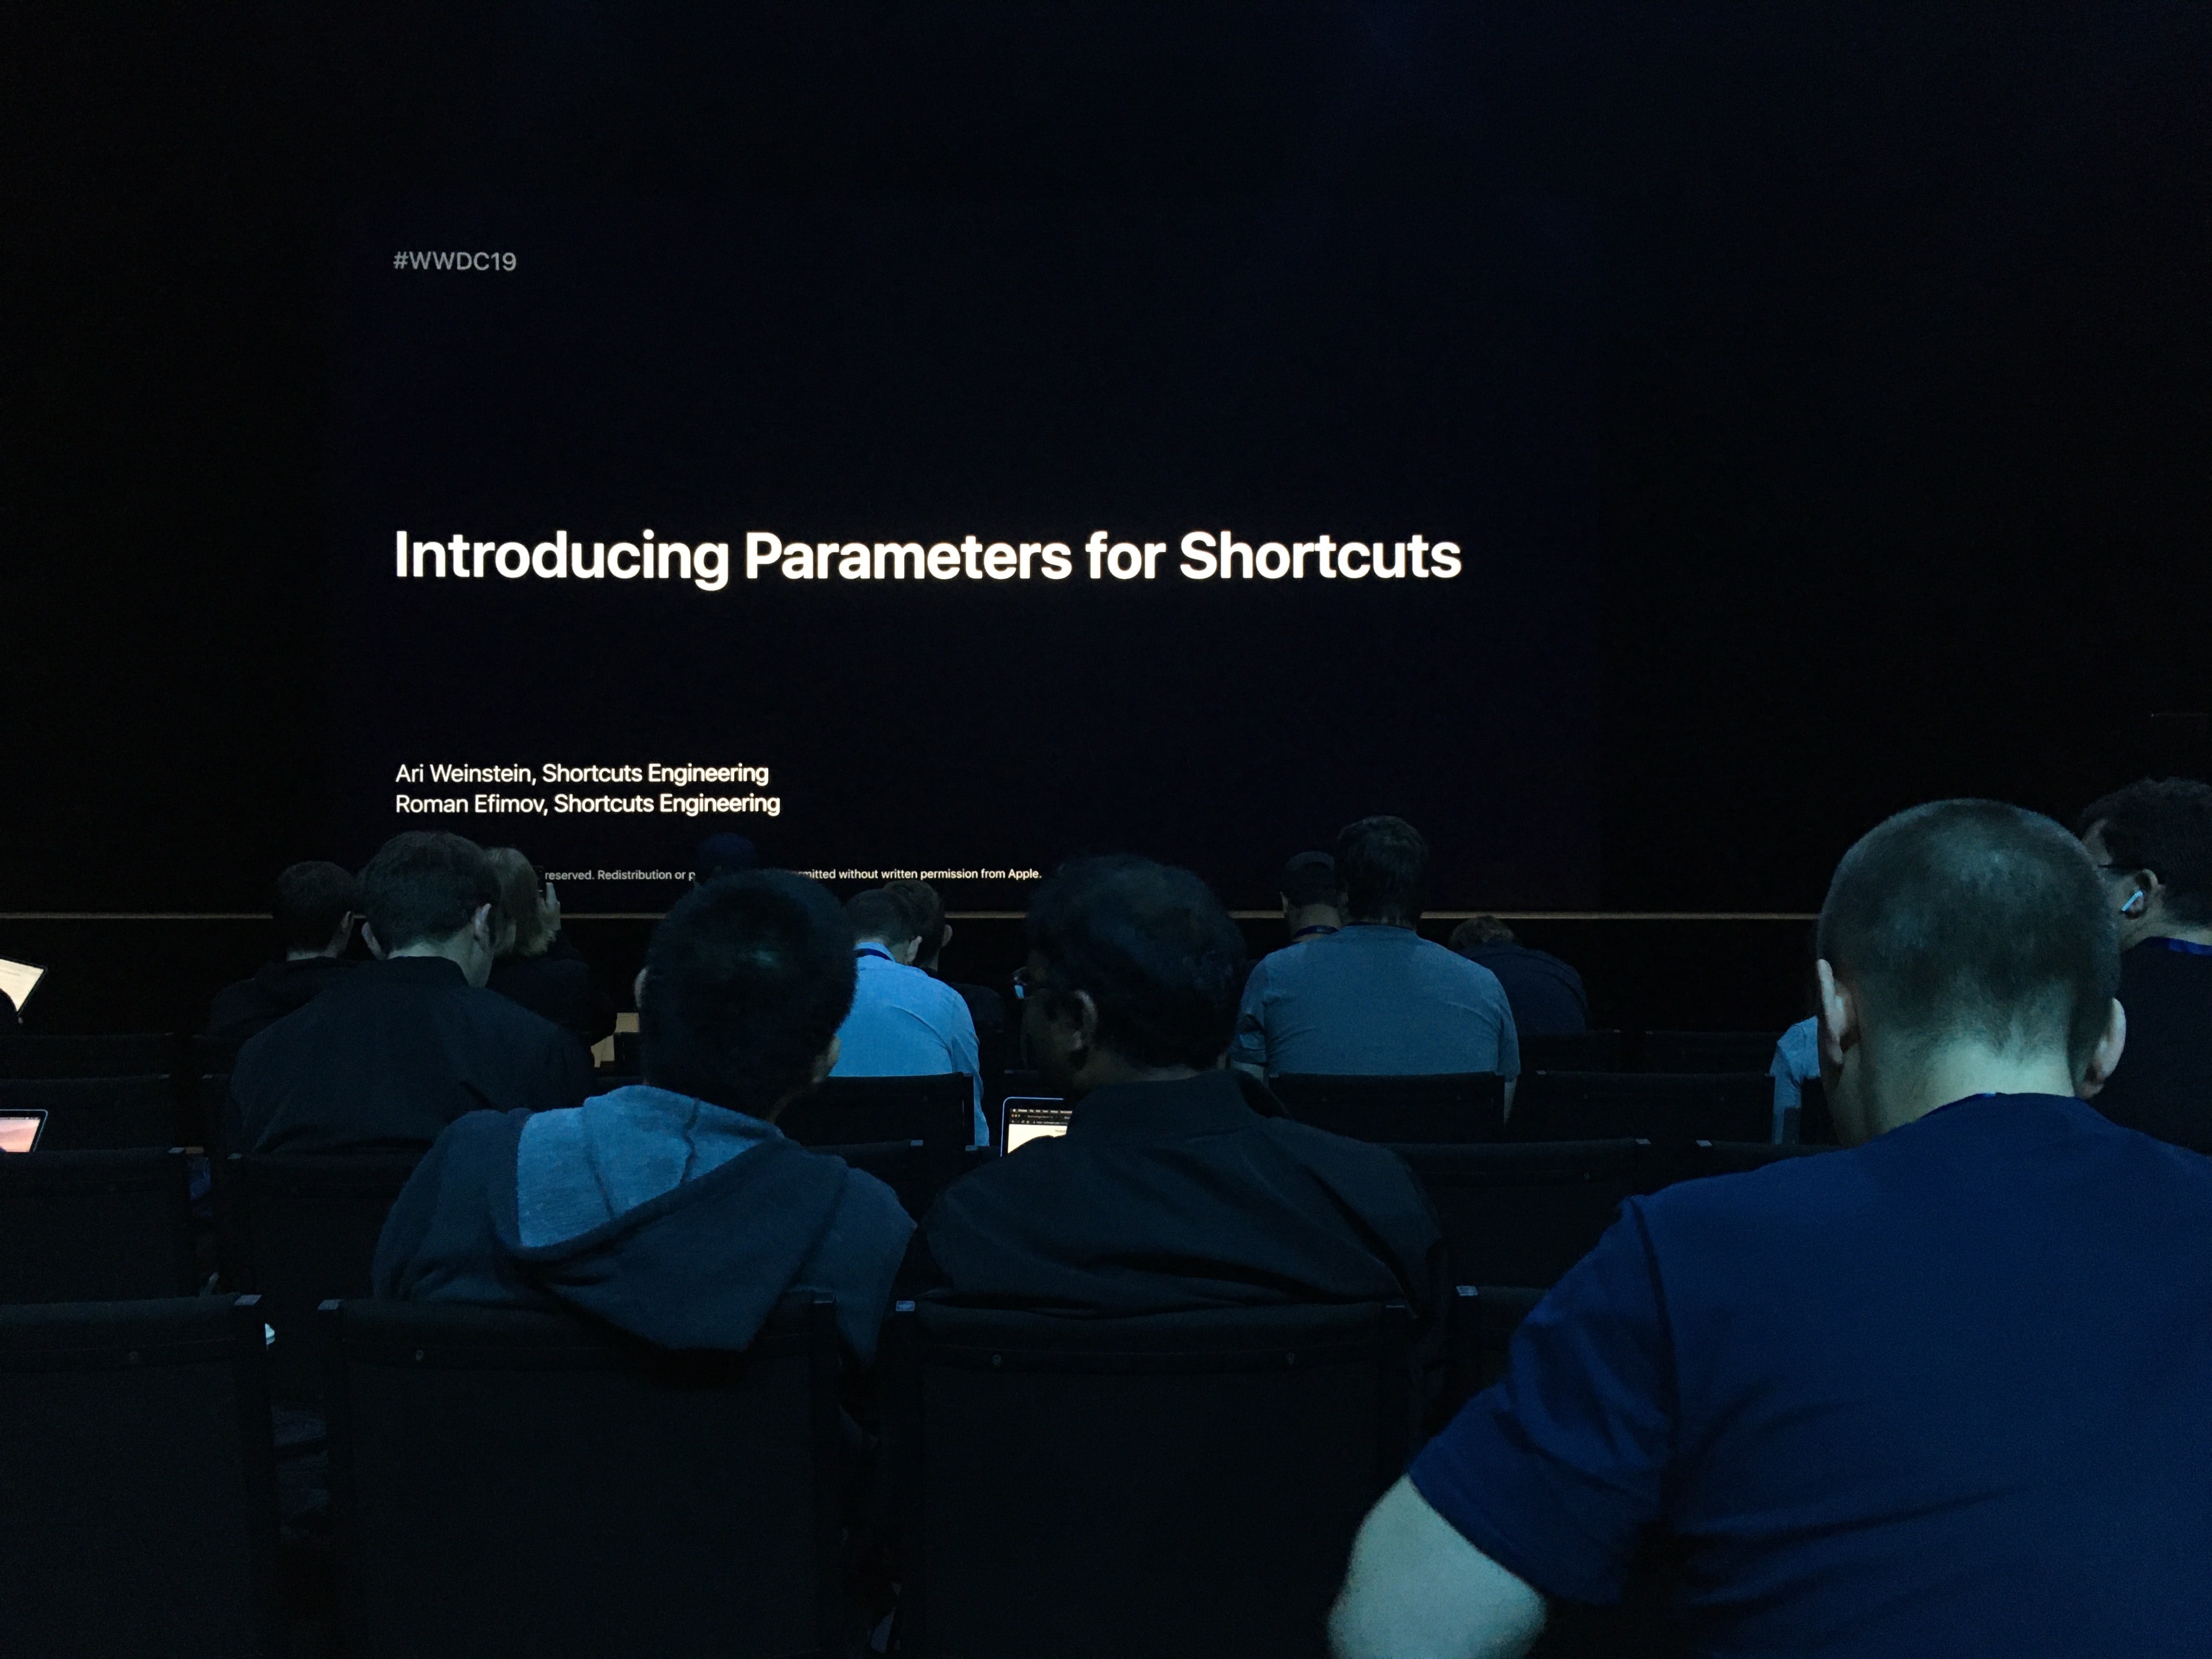 WWDC Session called Introducing Parameters for Shortcuts